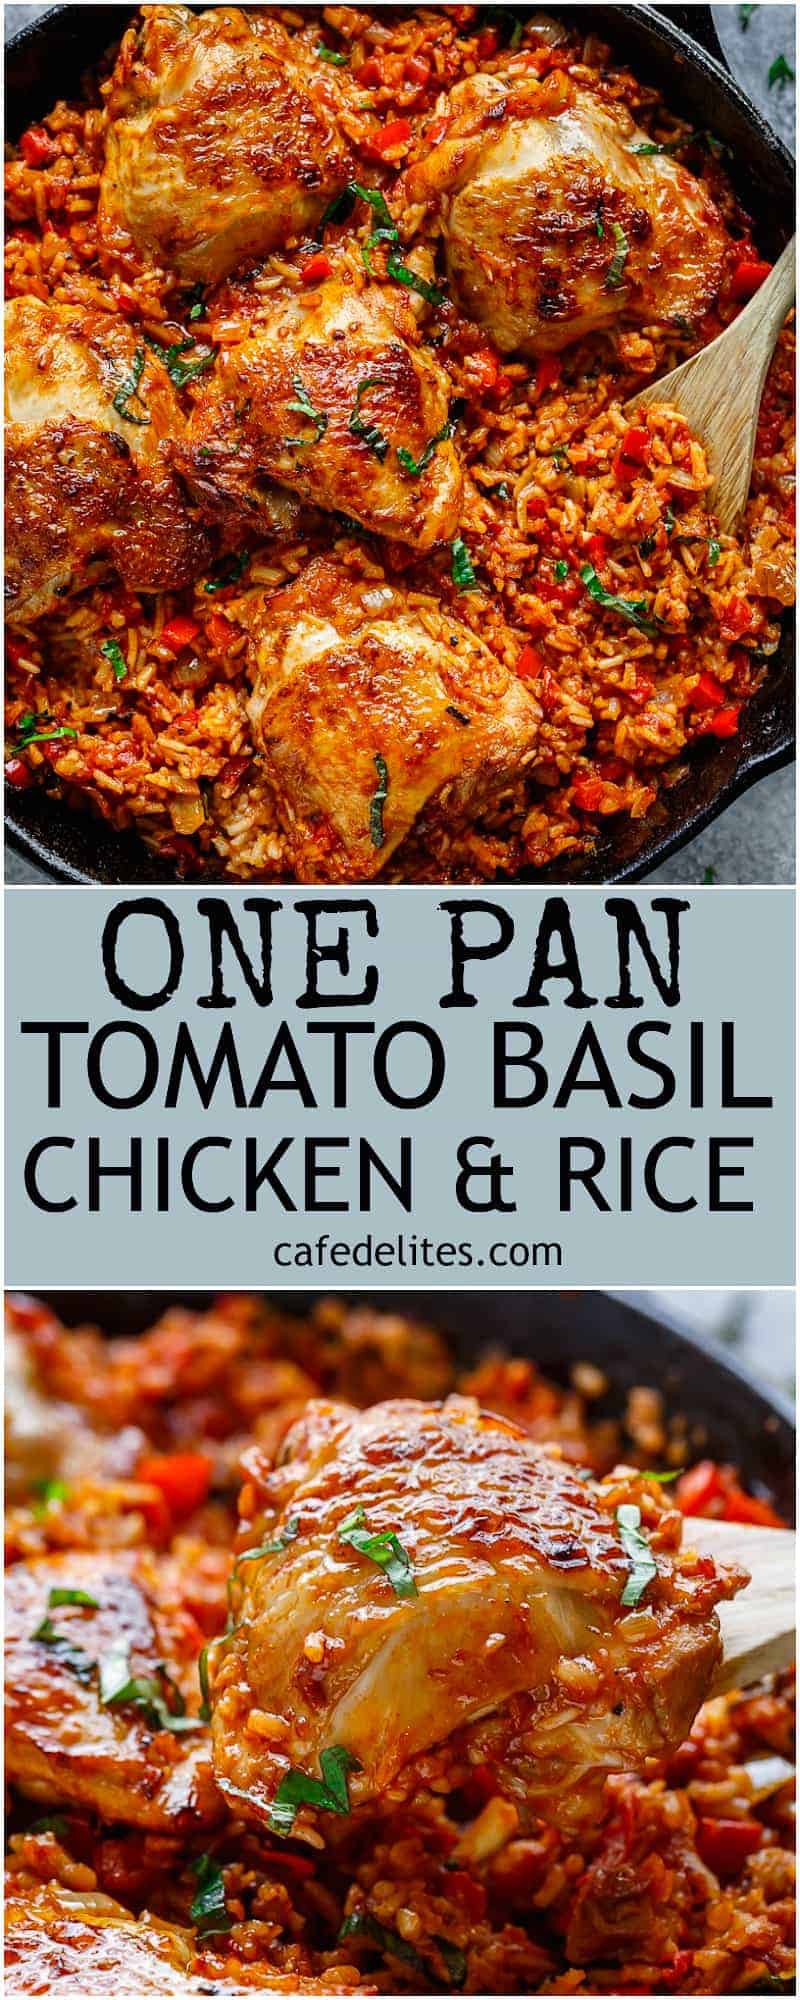 Crispy chicken bakes over a bed of tomato basil rice in this One Pan Tomato Basil Chicken & Rice. Dinner is ready in 45 minutes! All made in one pan | https://cafedelites.com